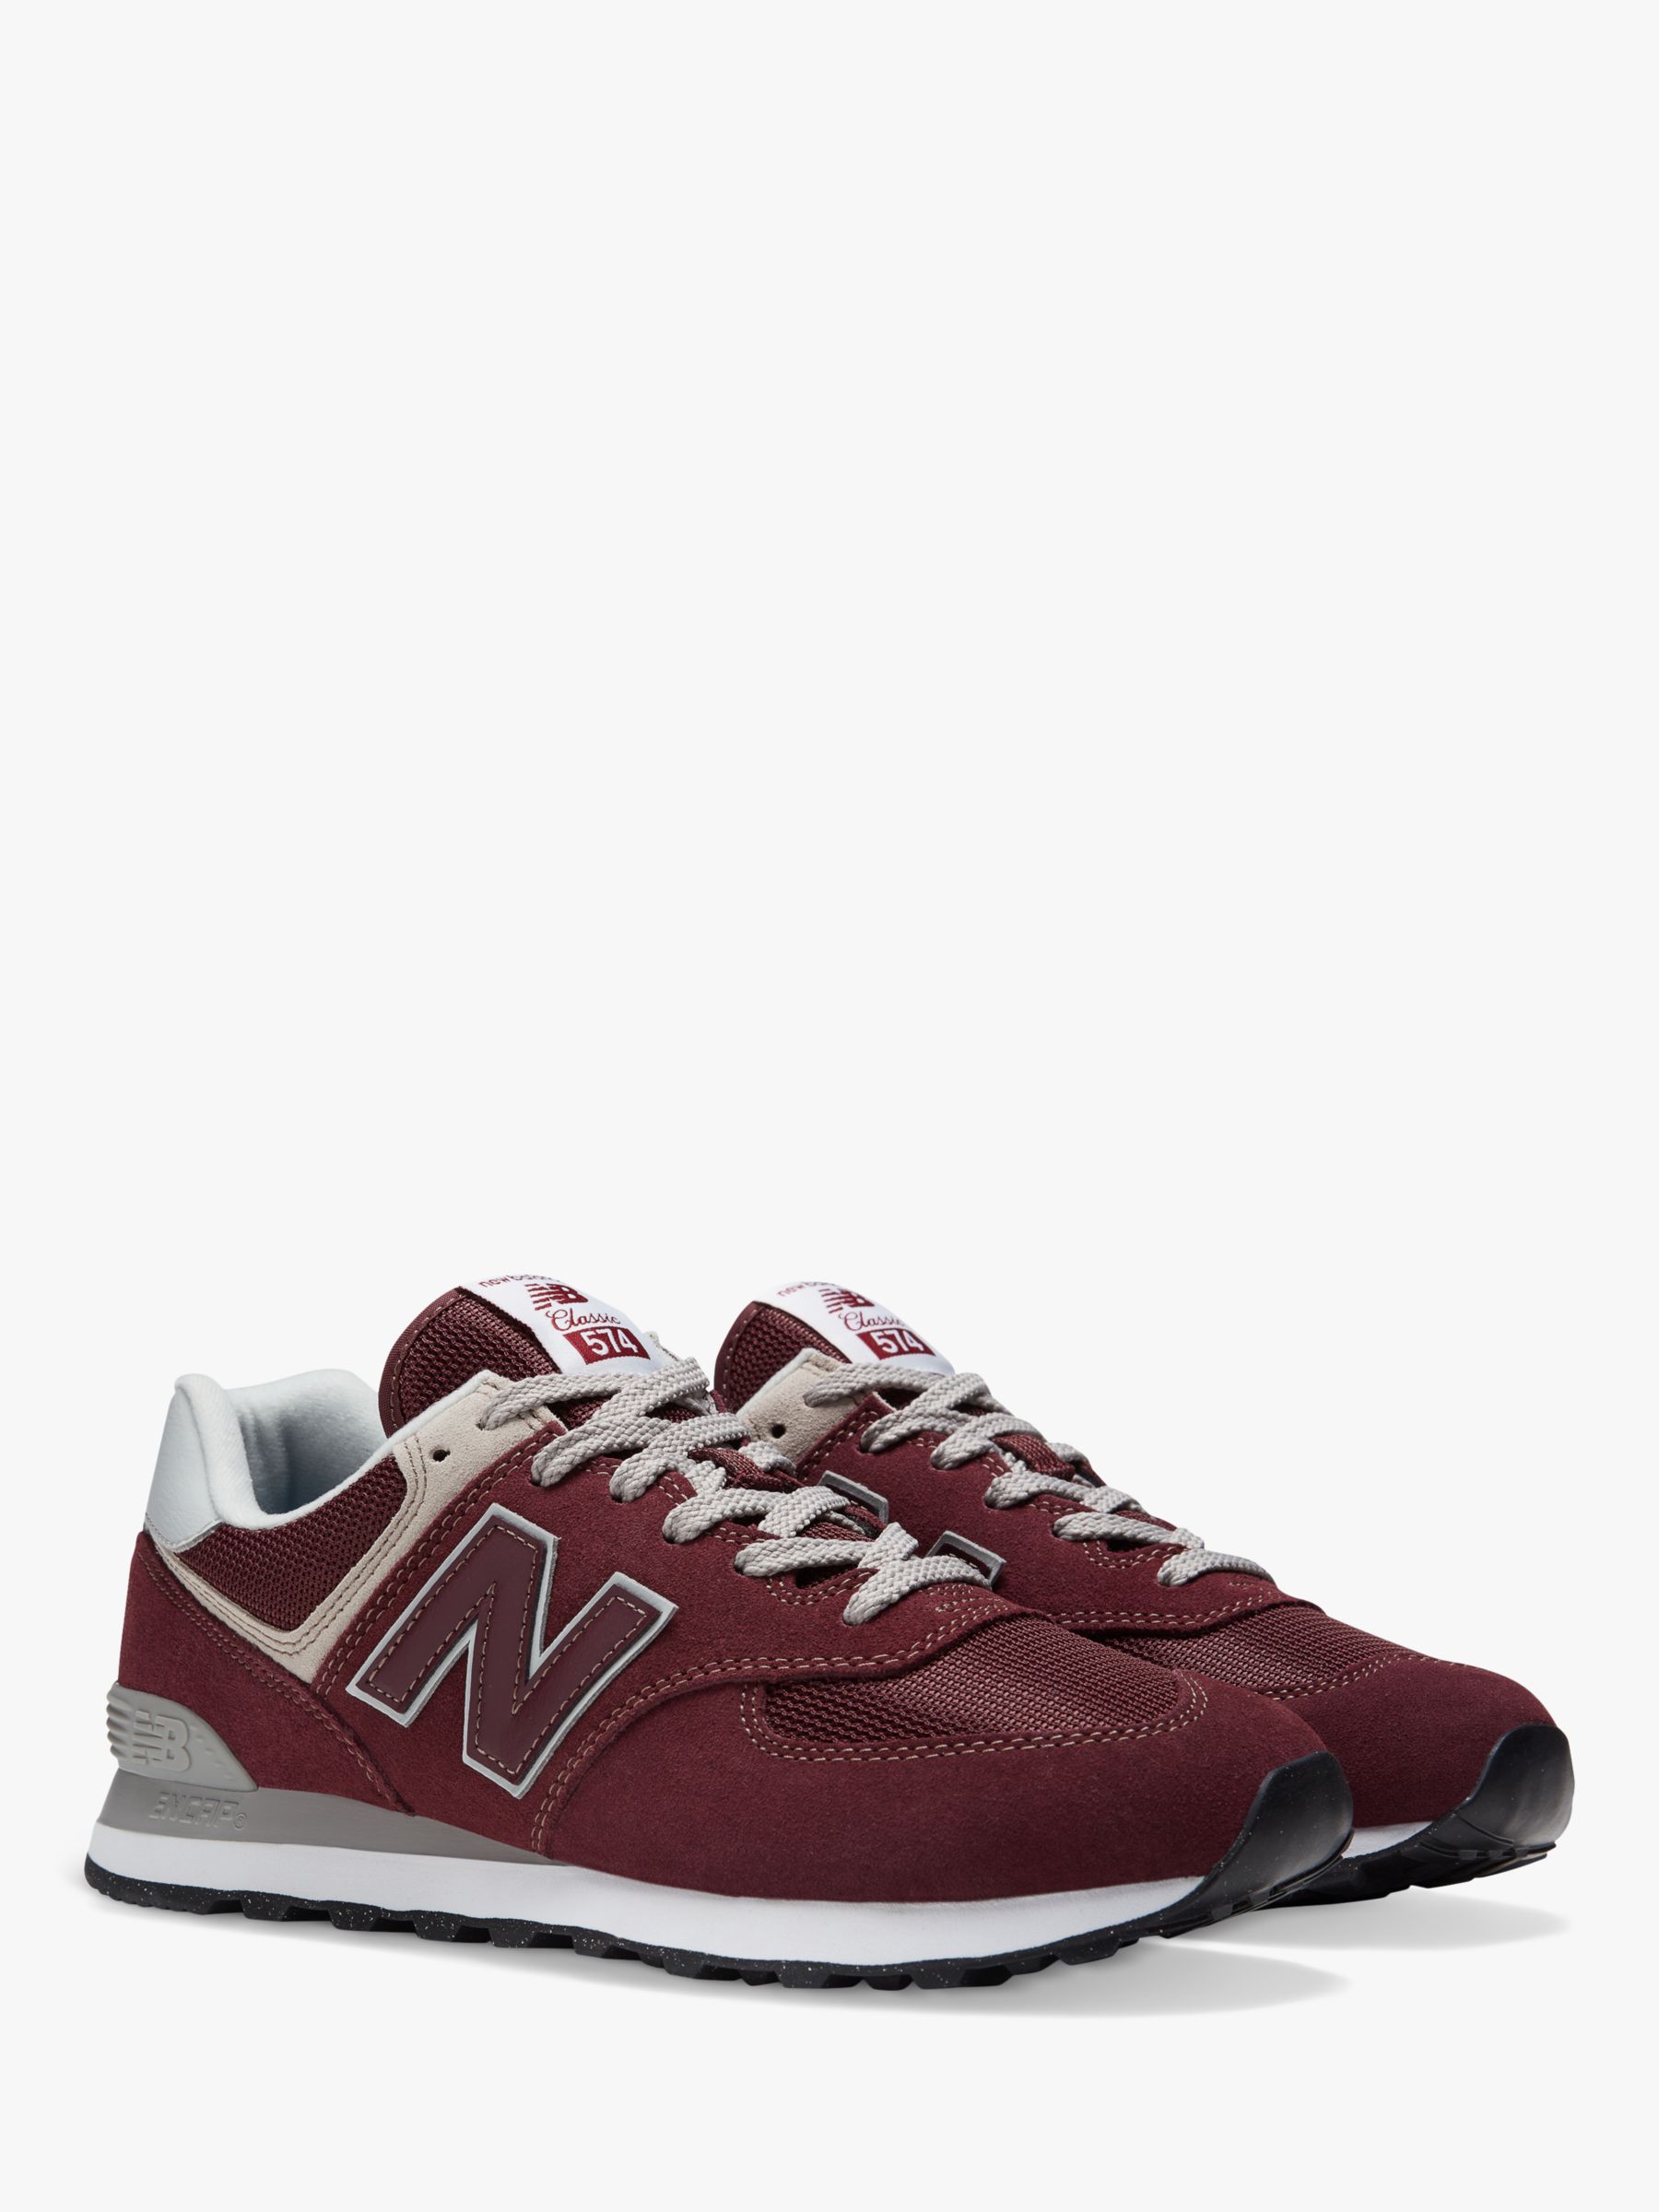 New Balance 574 Suede Trainers, Red, 7